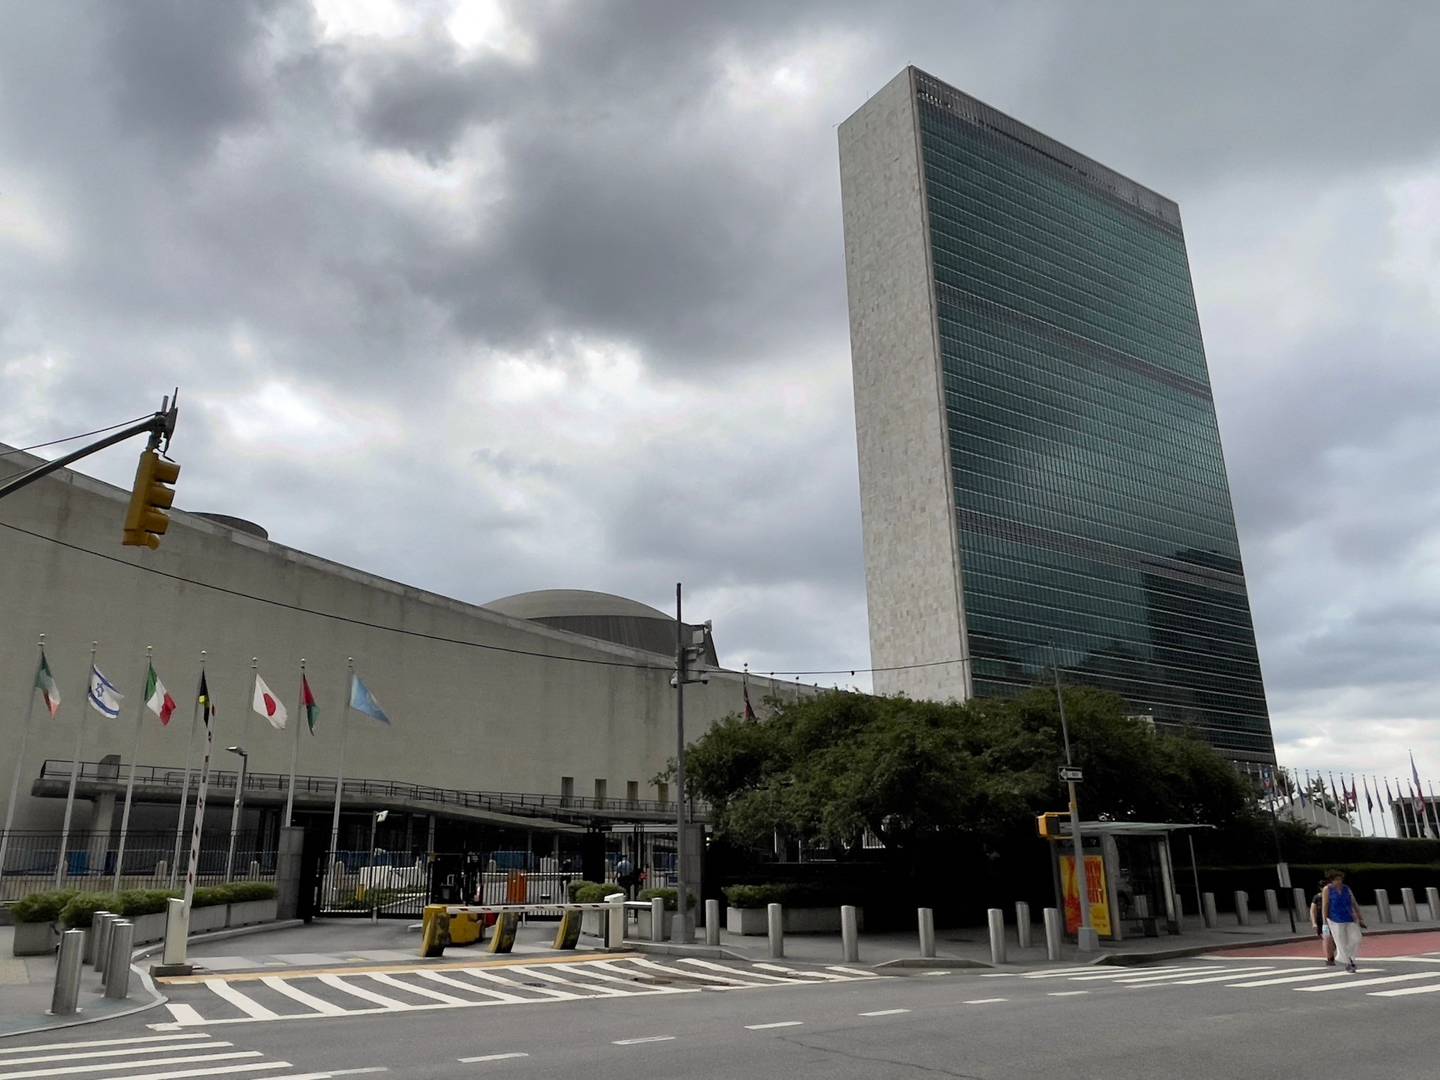 The UN headquarters in New York City. AFP